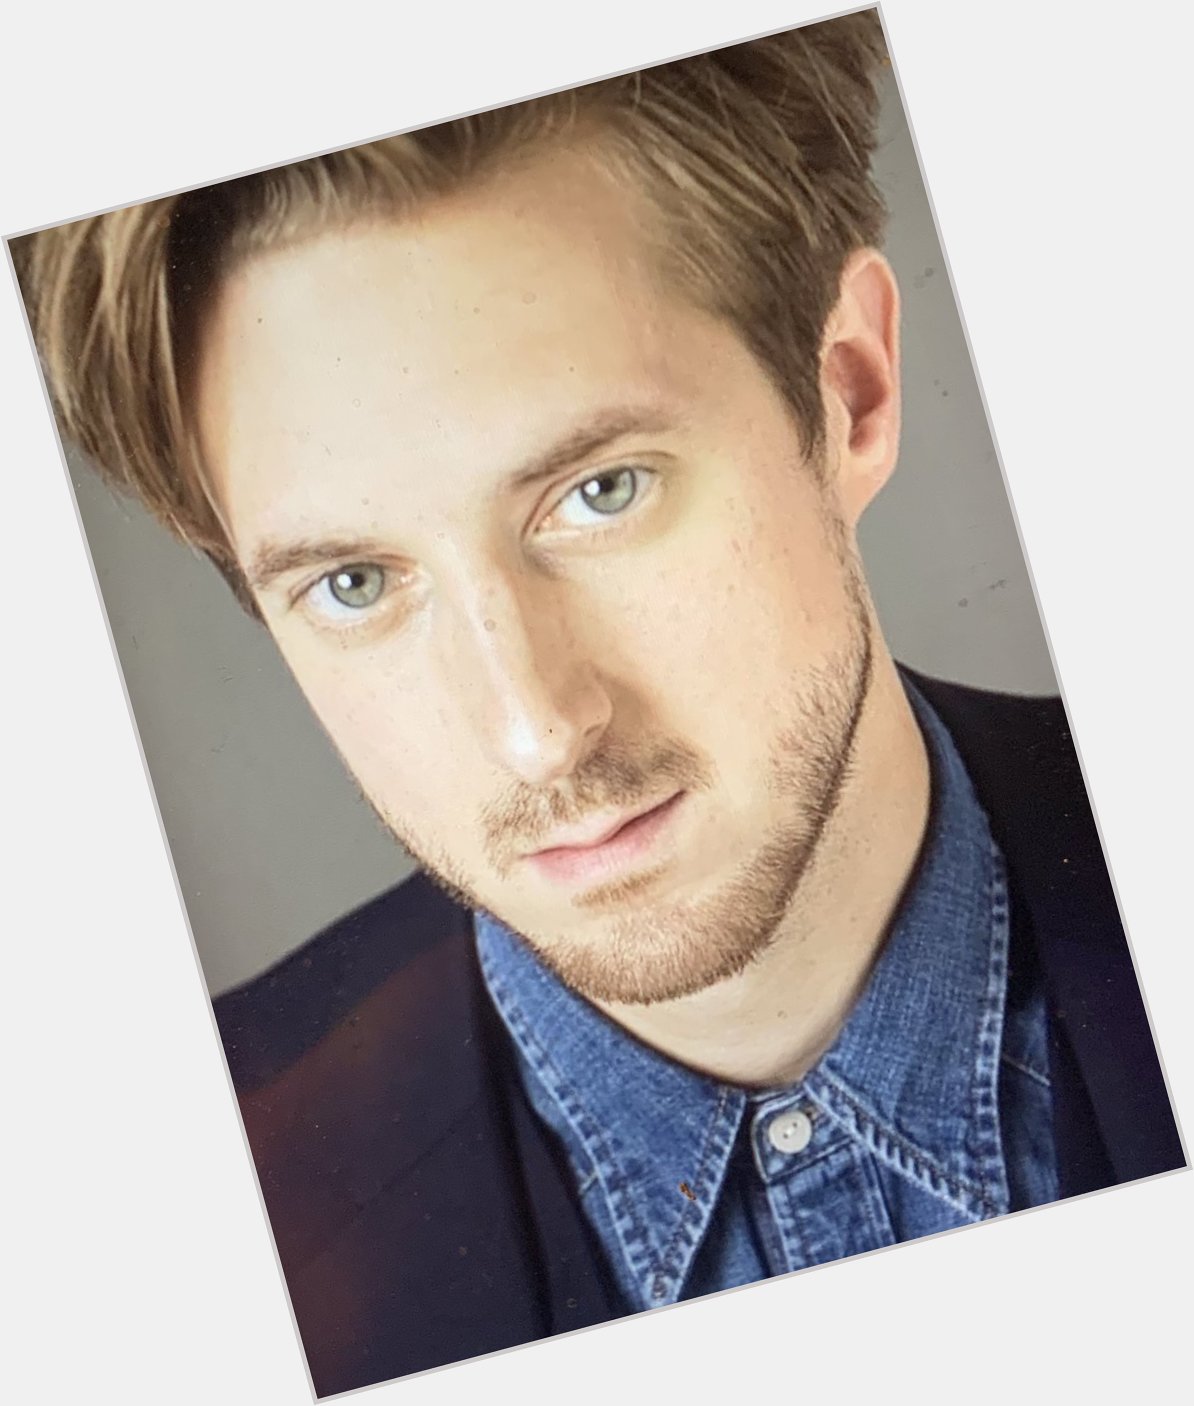 I would like to wish Arthur Darvill a happy 40th birthday today 